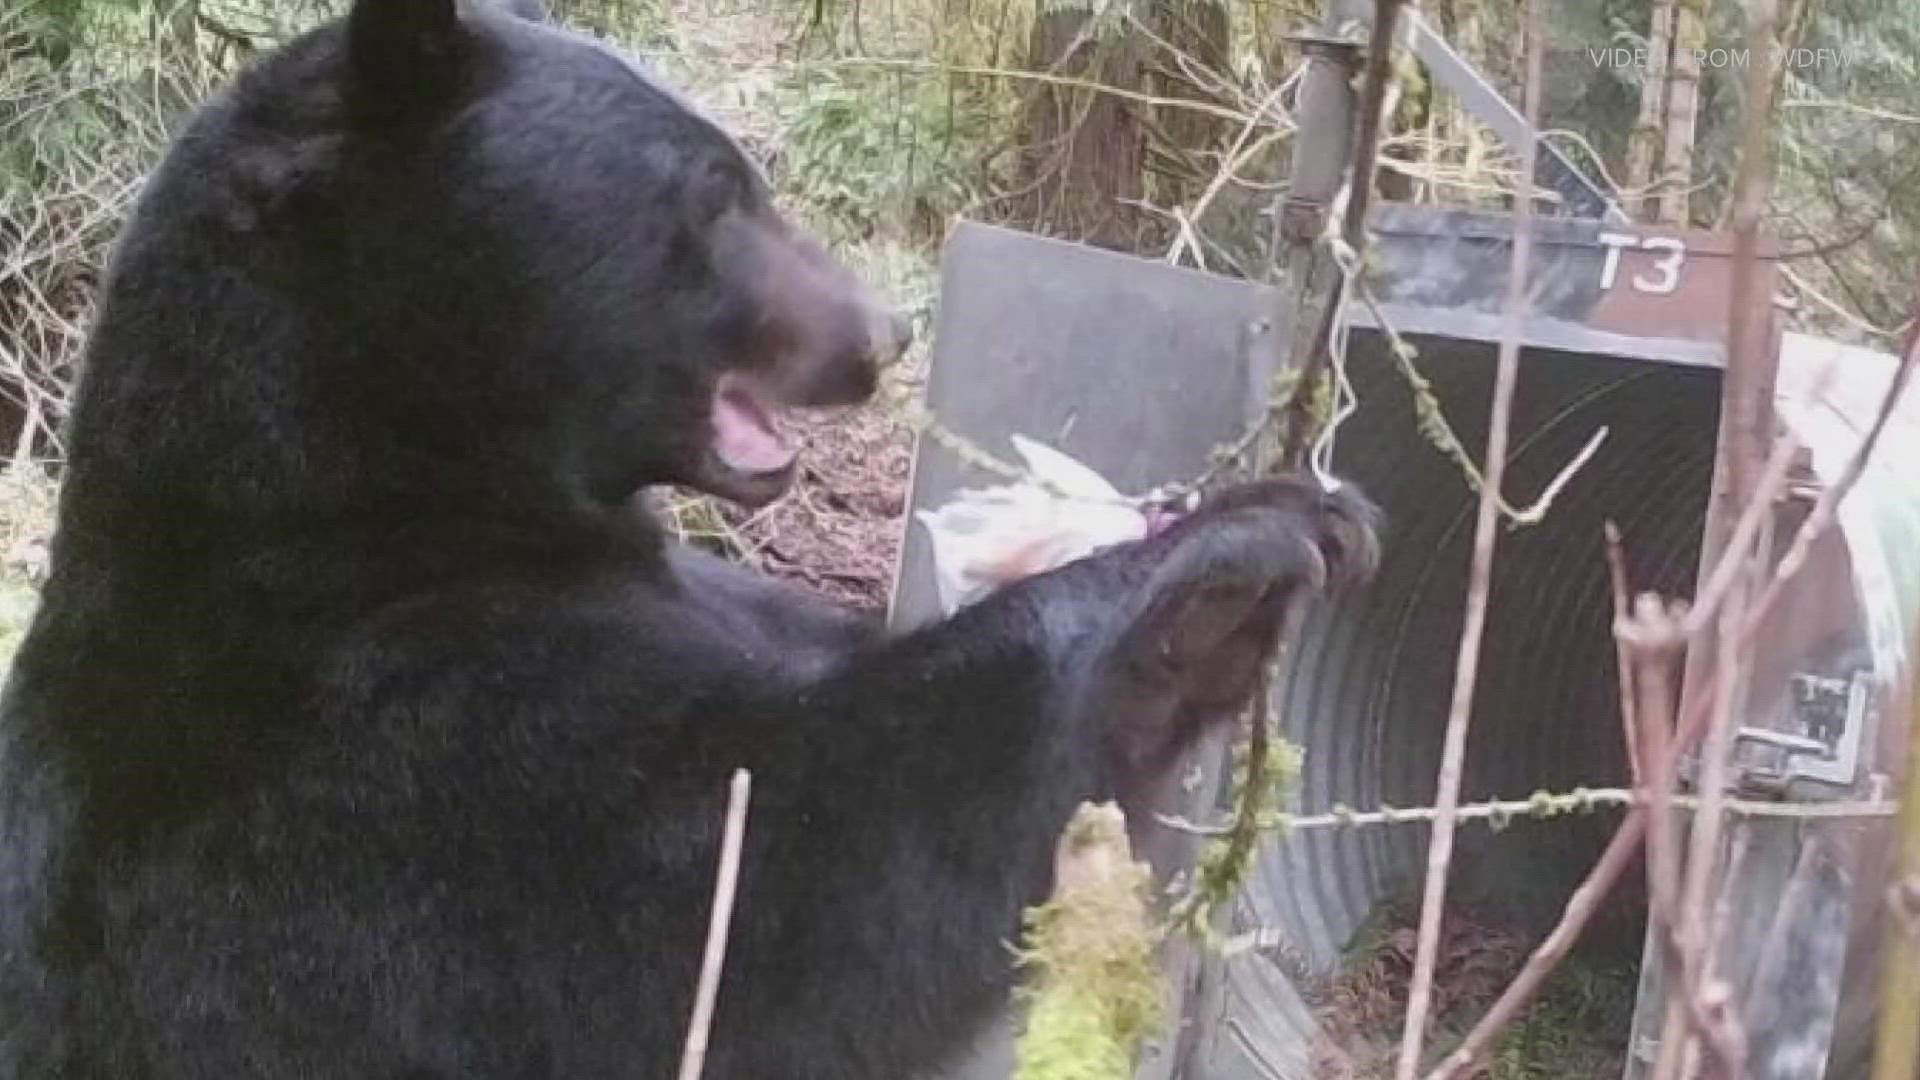 The bear's radio collar has stopped working. The bear is believed to live between Squak Mountain and Cougar Mountain.